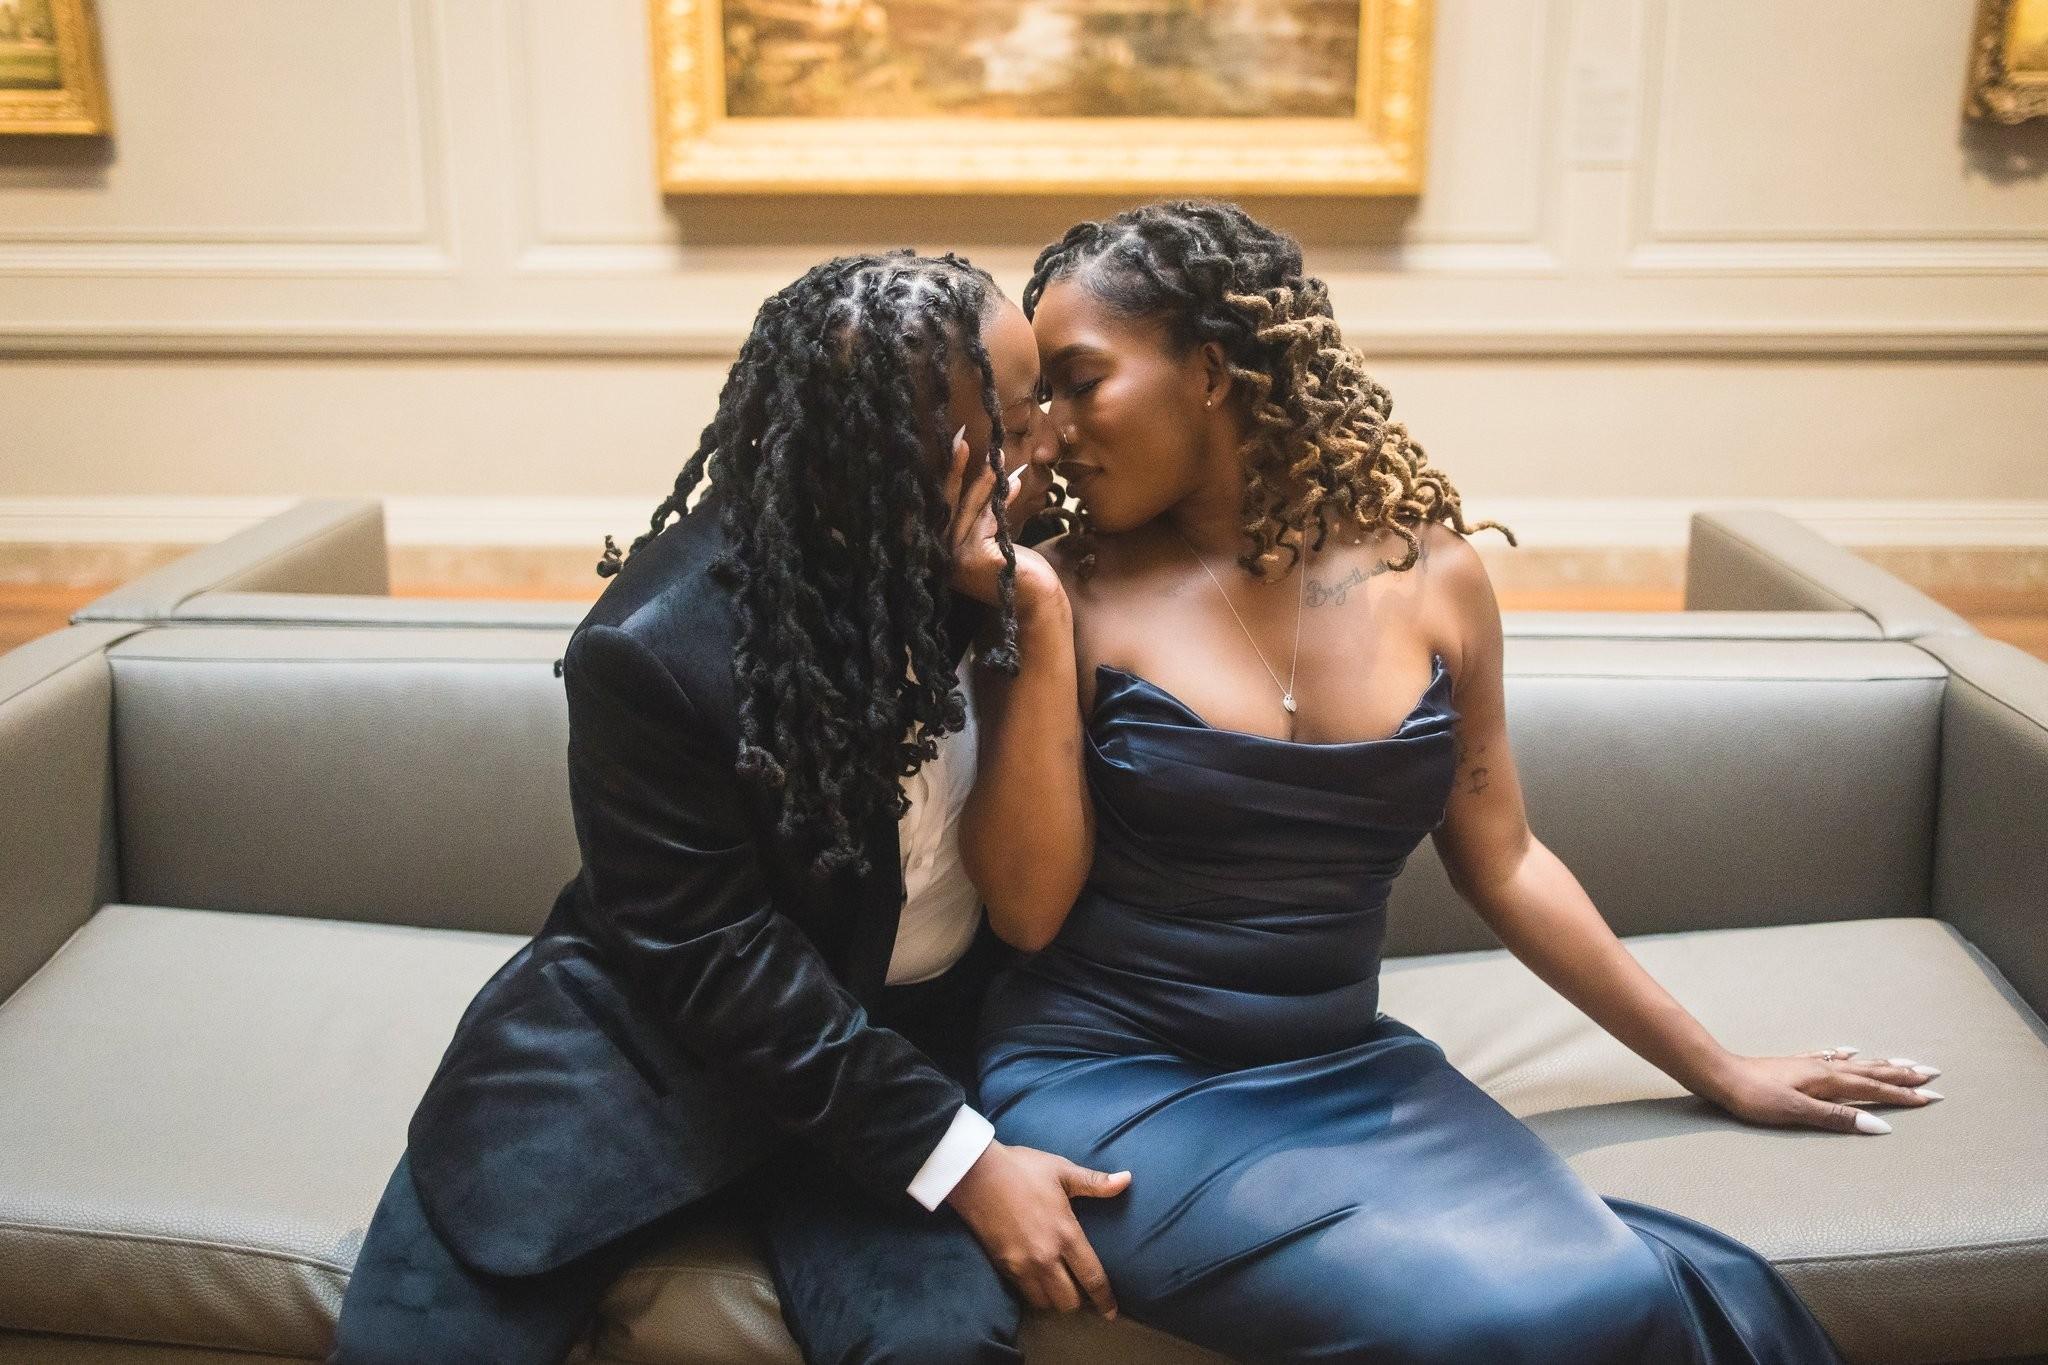 A Romantic Engagement Session at the National Gallery of Art D.C.